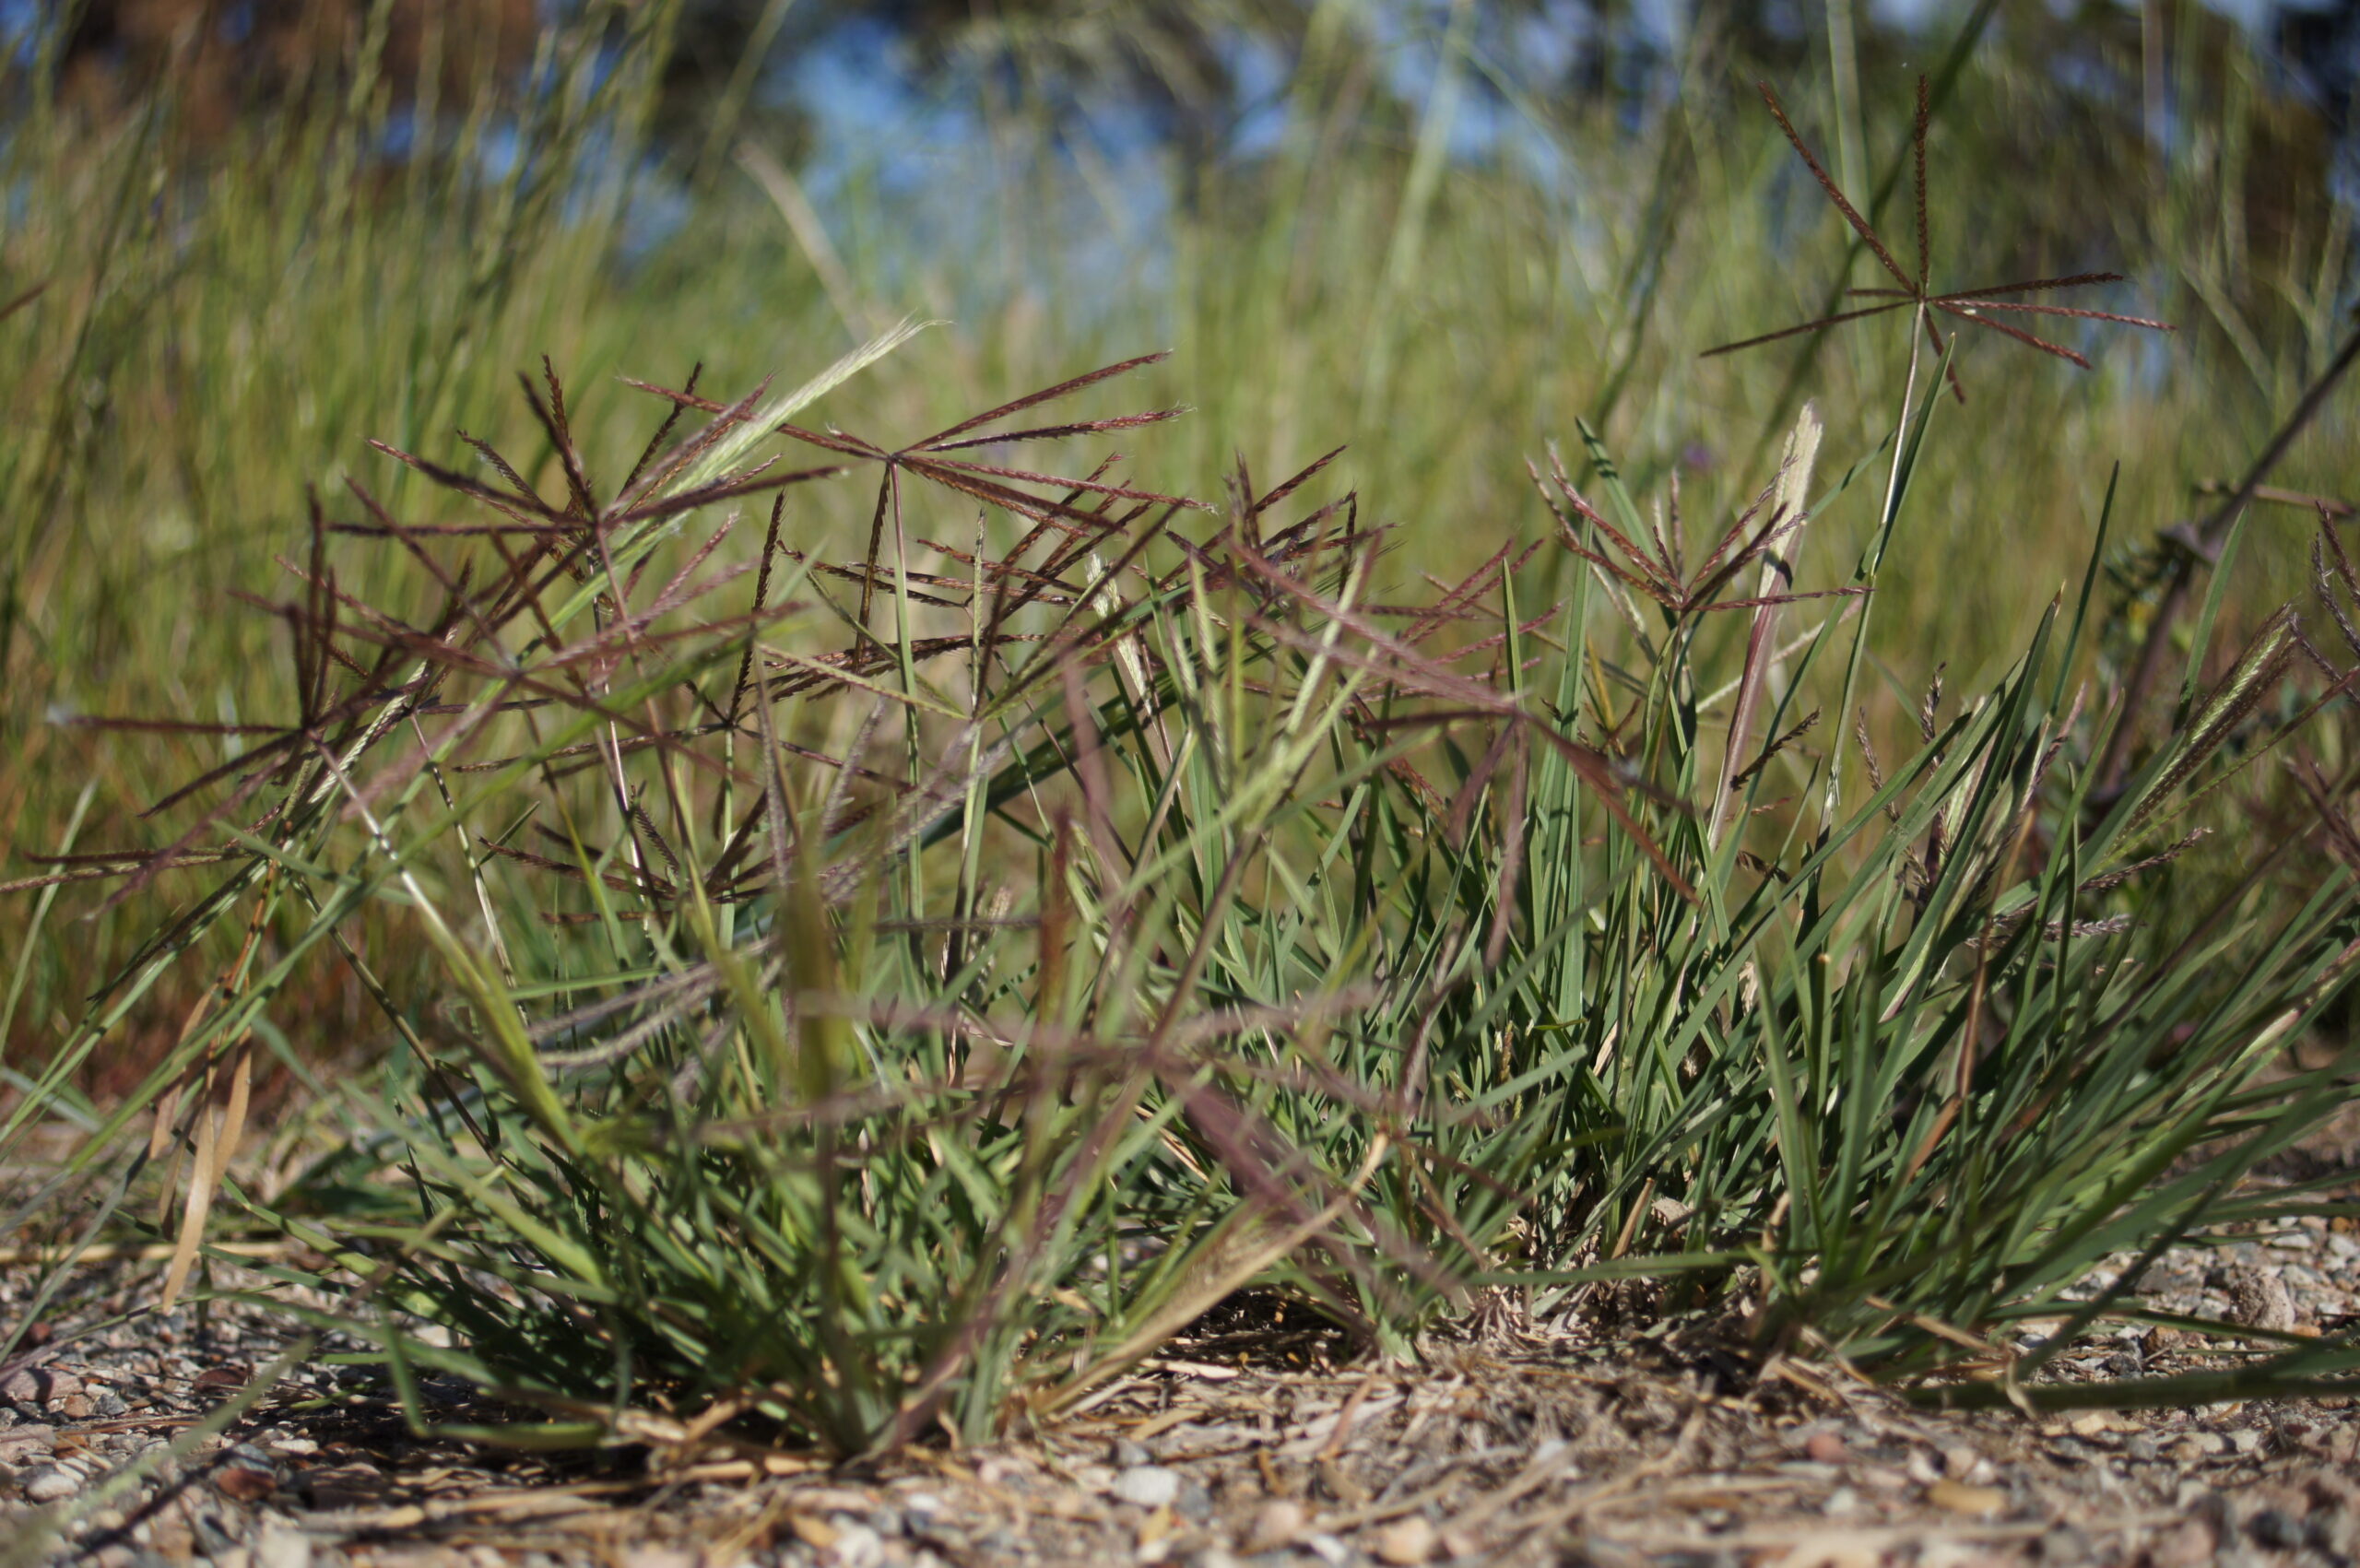 Photograph of windmill grass. The photo shows several clumps of short, green grass with brown inflorescences, the arms of which are bent to the side at the tips of the stems, giving the grass a windmill-like appearance.